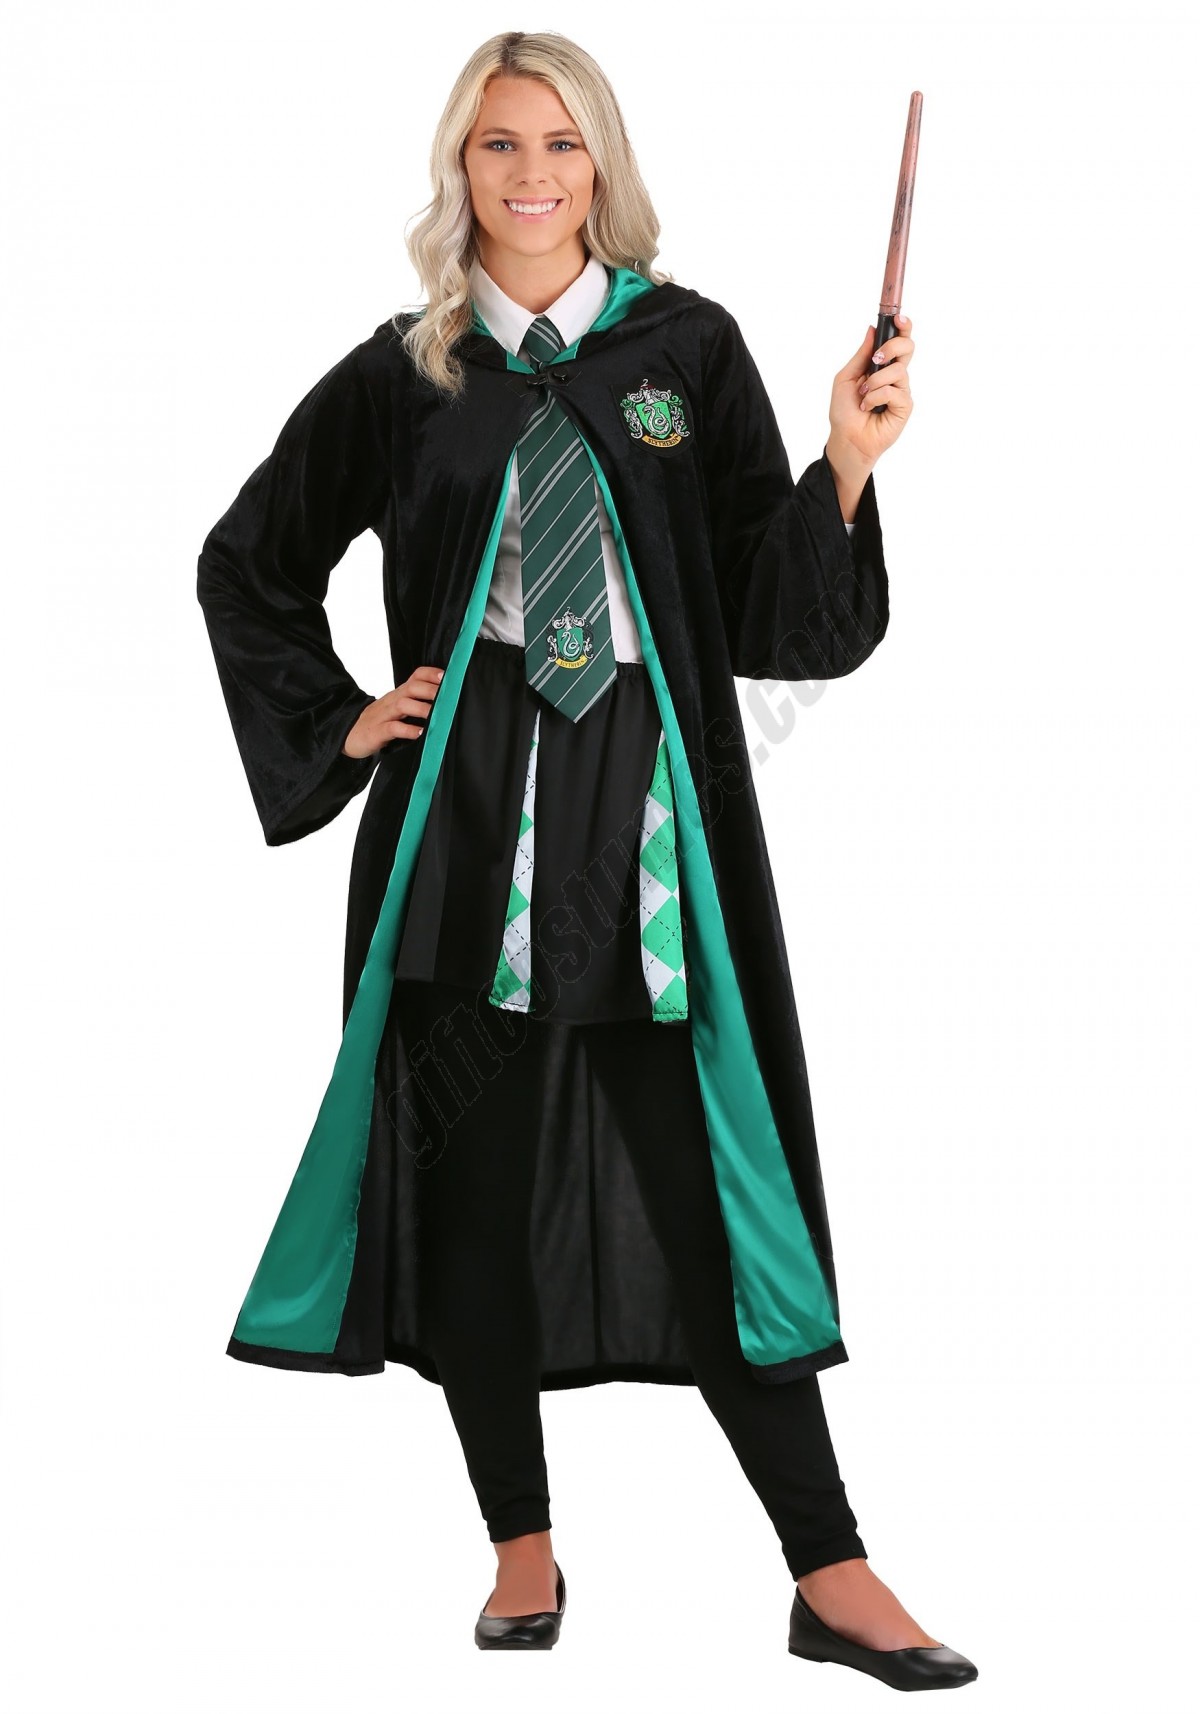 Harry Potter Deluxe Slytherin Robe Costume for Adults - Men's - -5